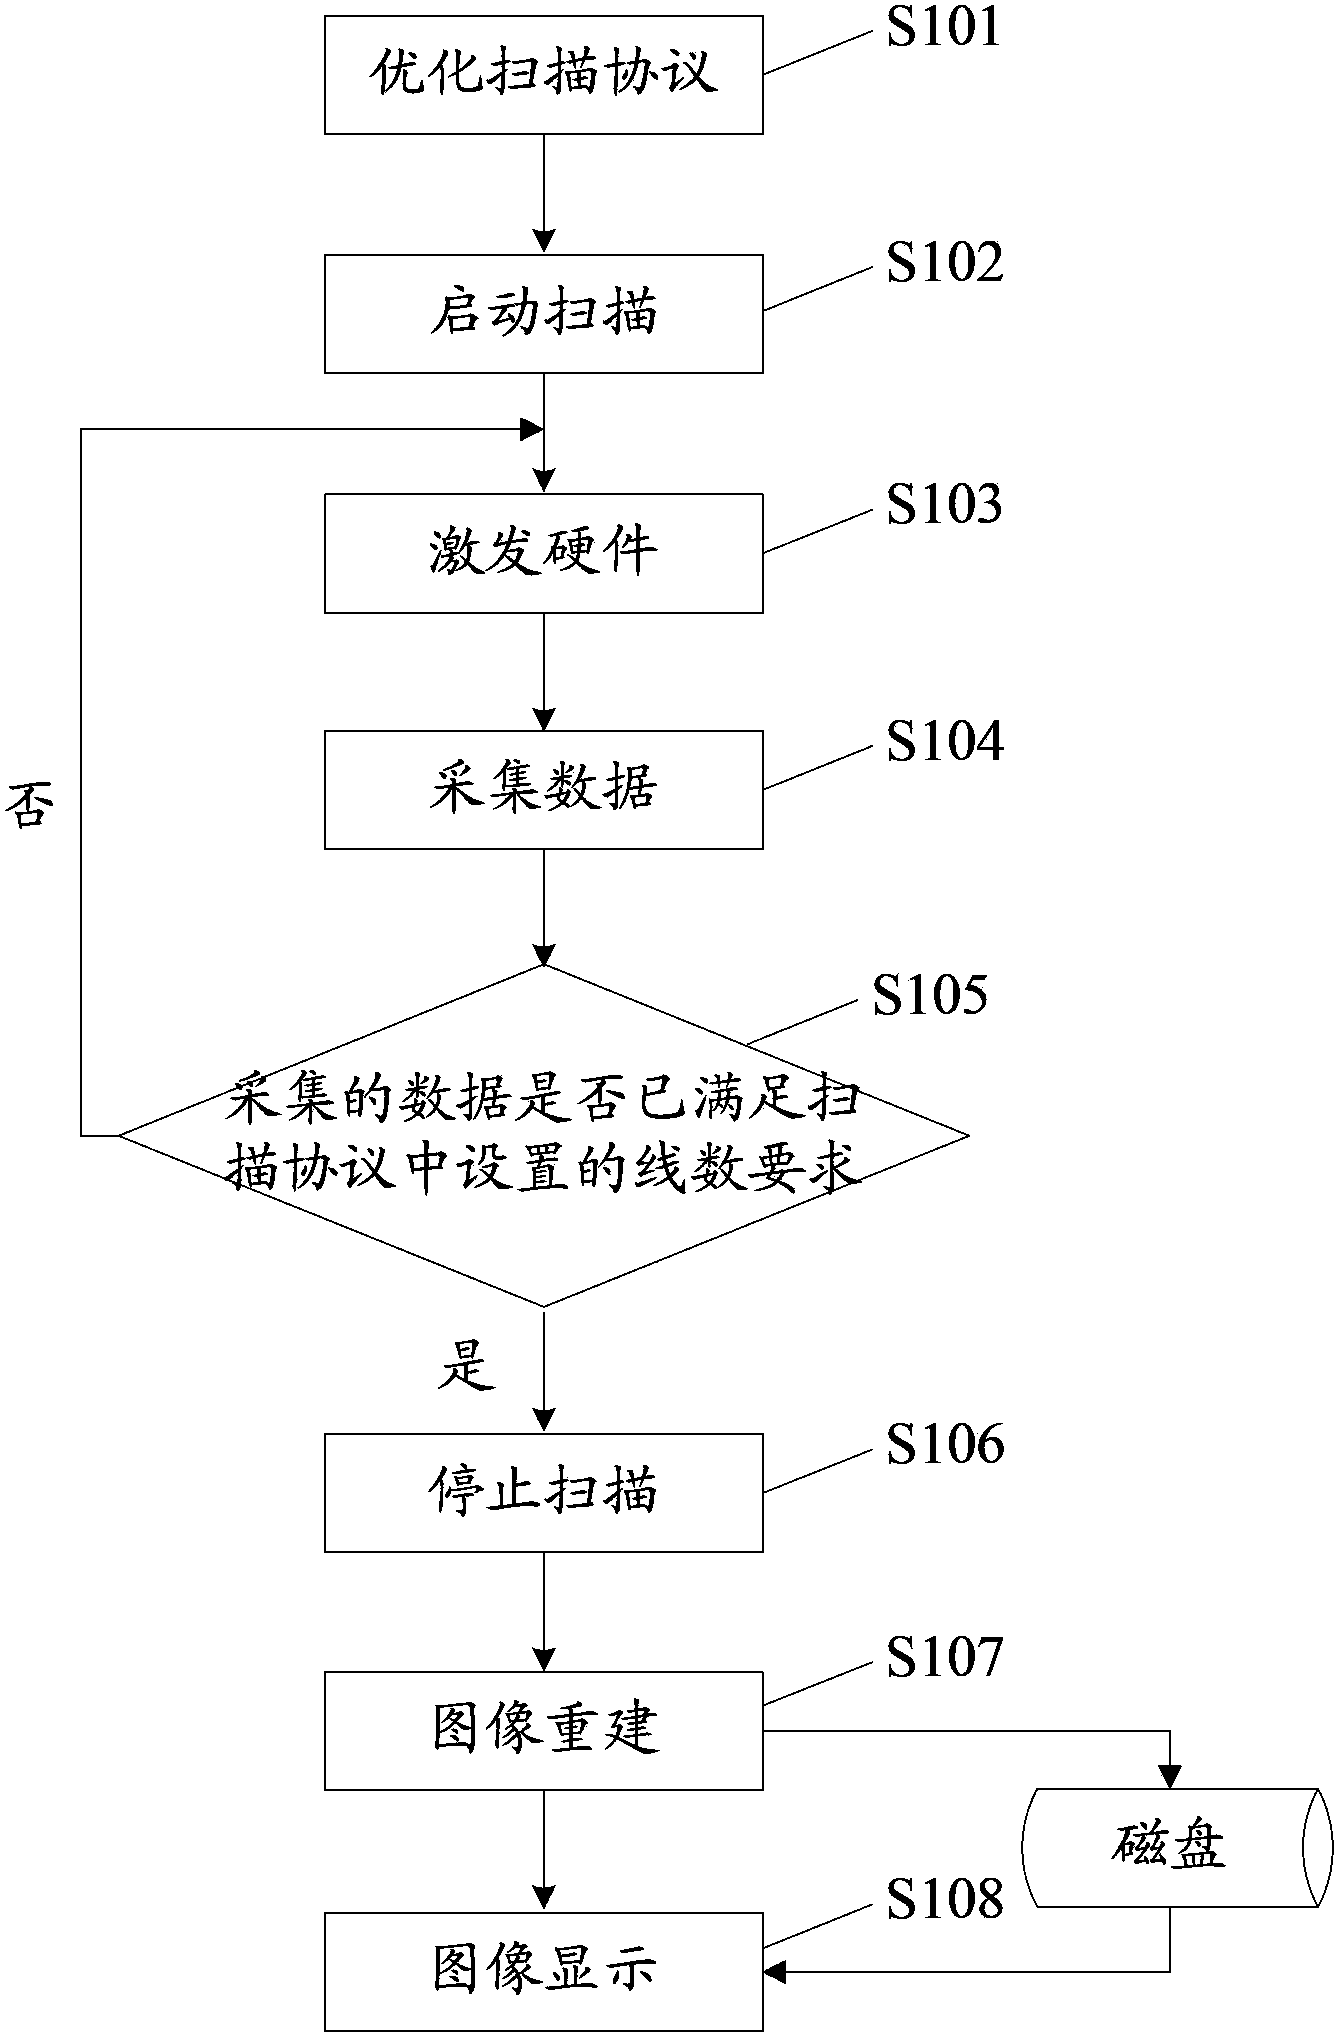 Magnetic resonance scanning imaging method and system